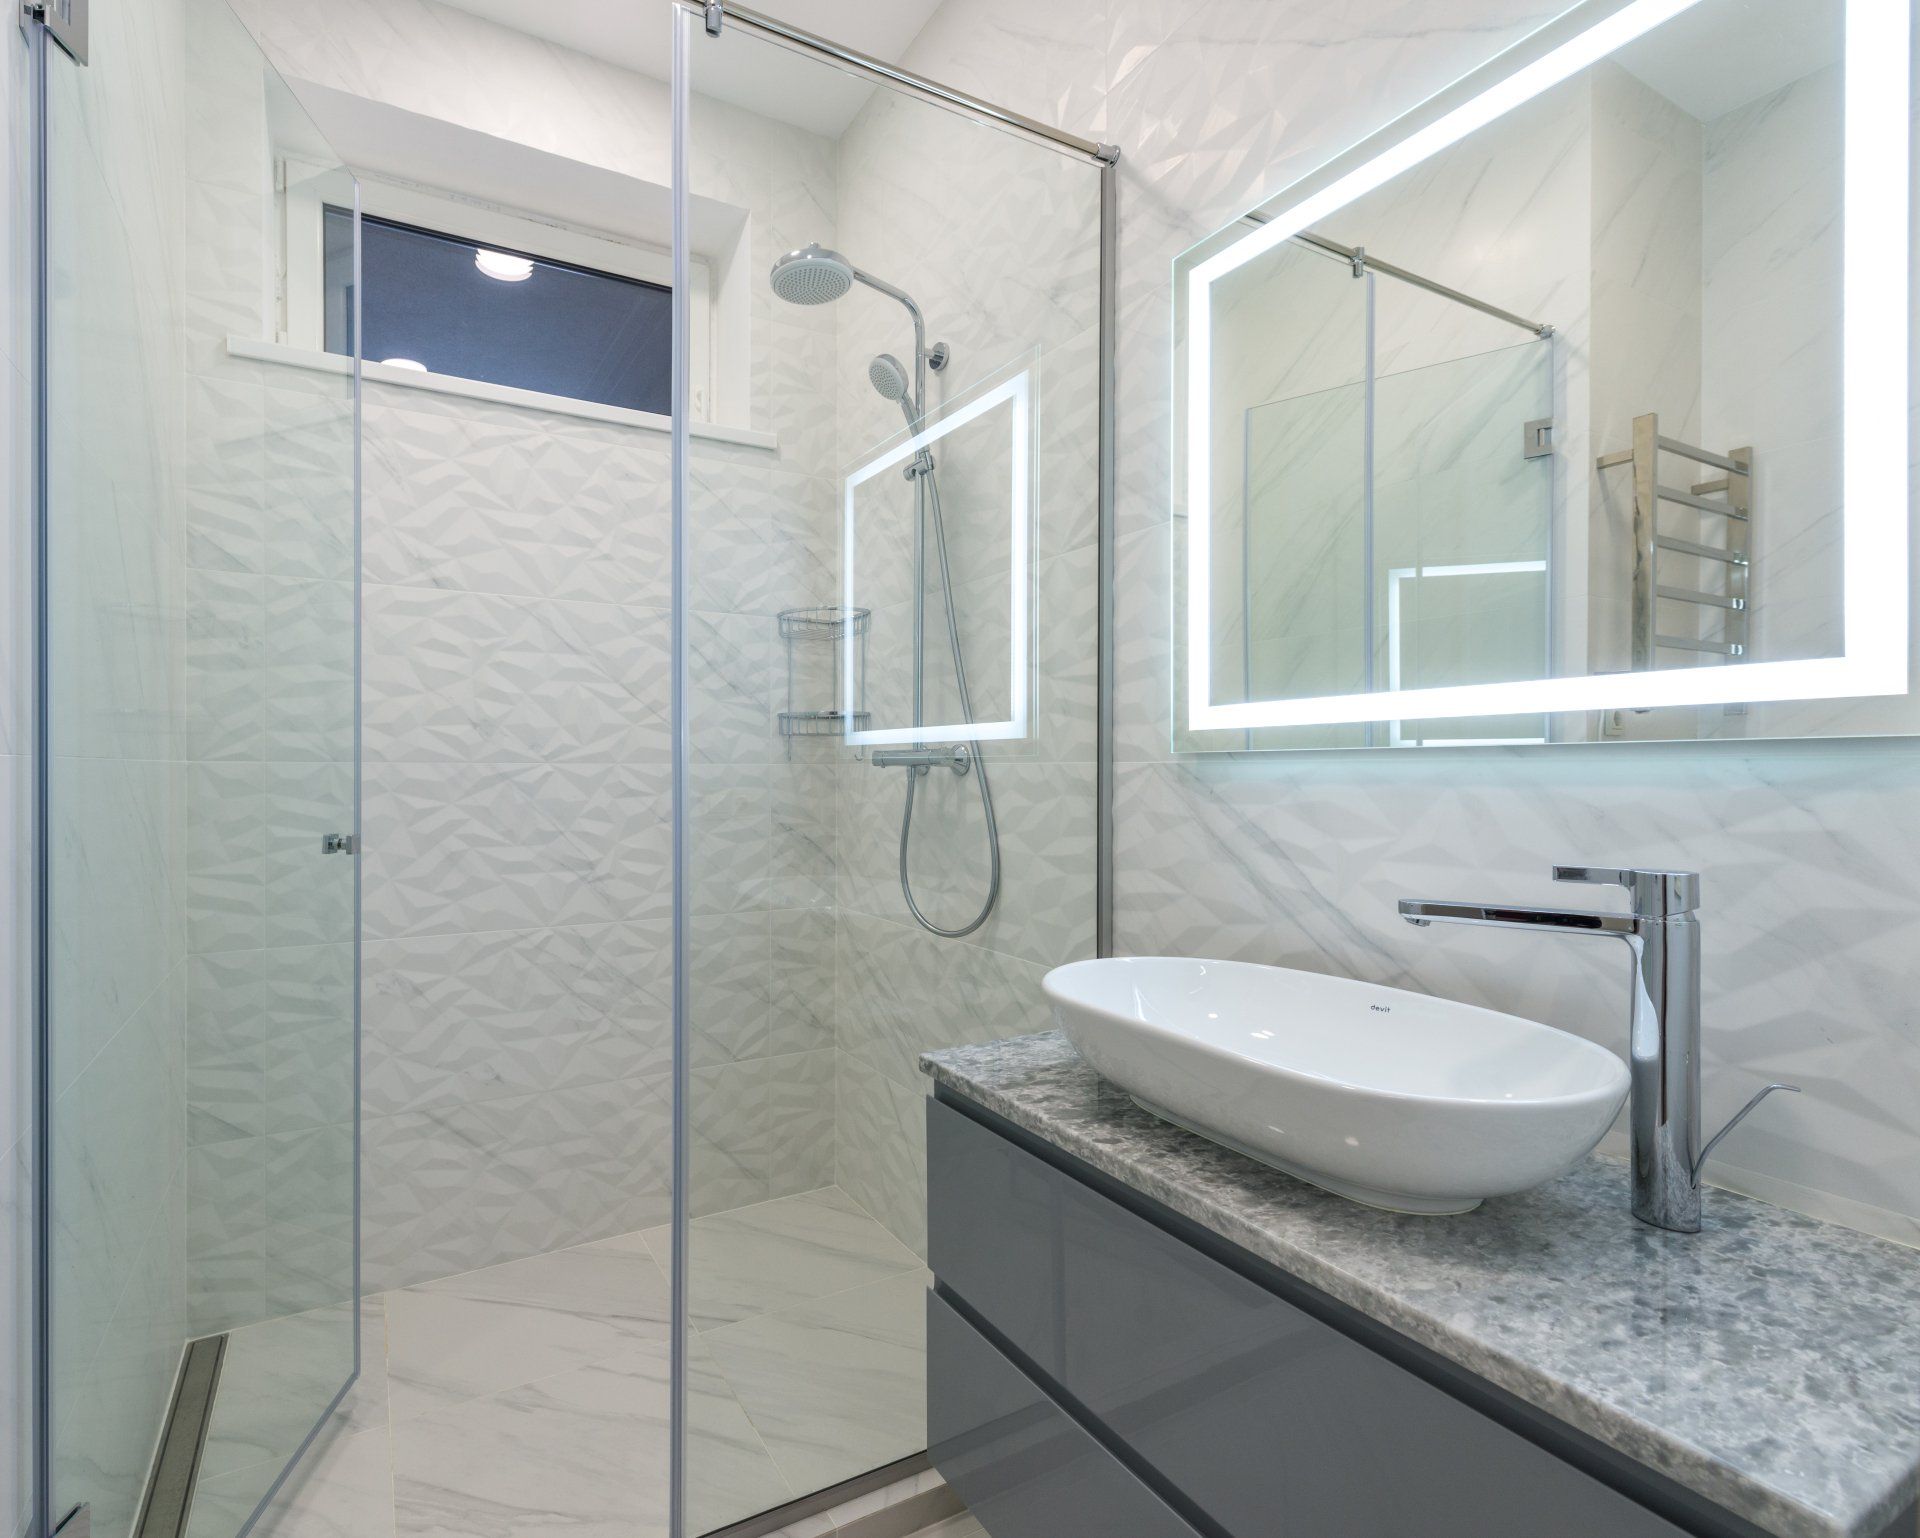 Bright bathroom with granite countertop and white geometric tile shower walls.